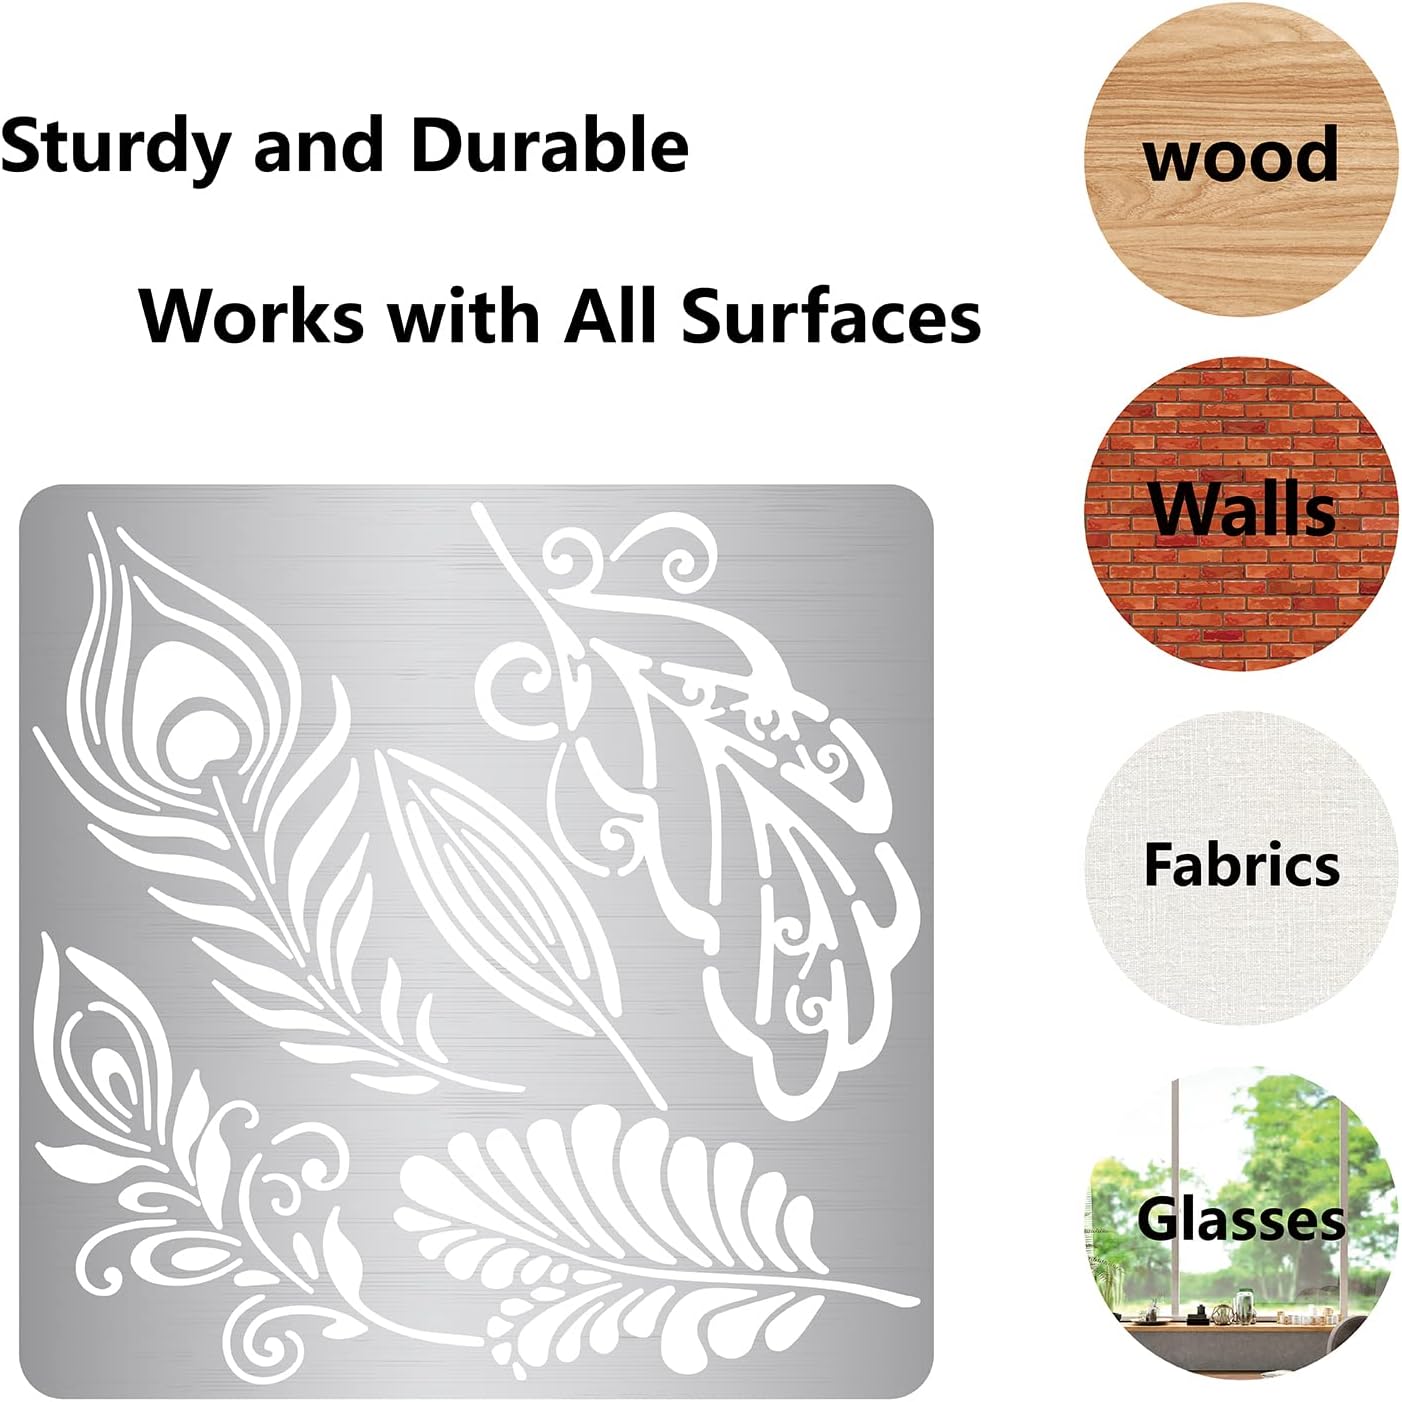 Metal Stencil Templates Journal Tool for Painting, Wood Burning, Pyrography and Engraving